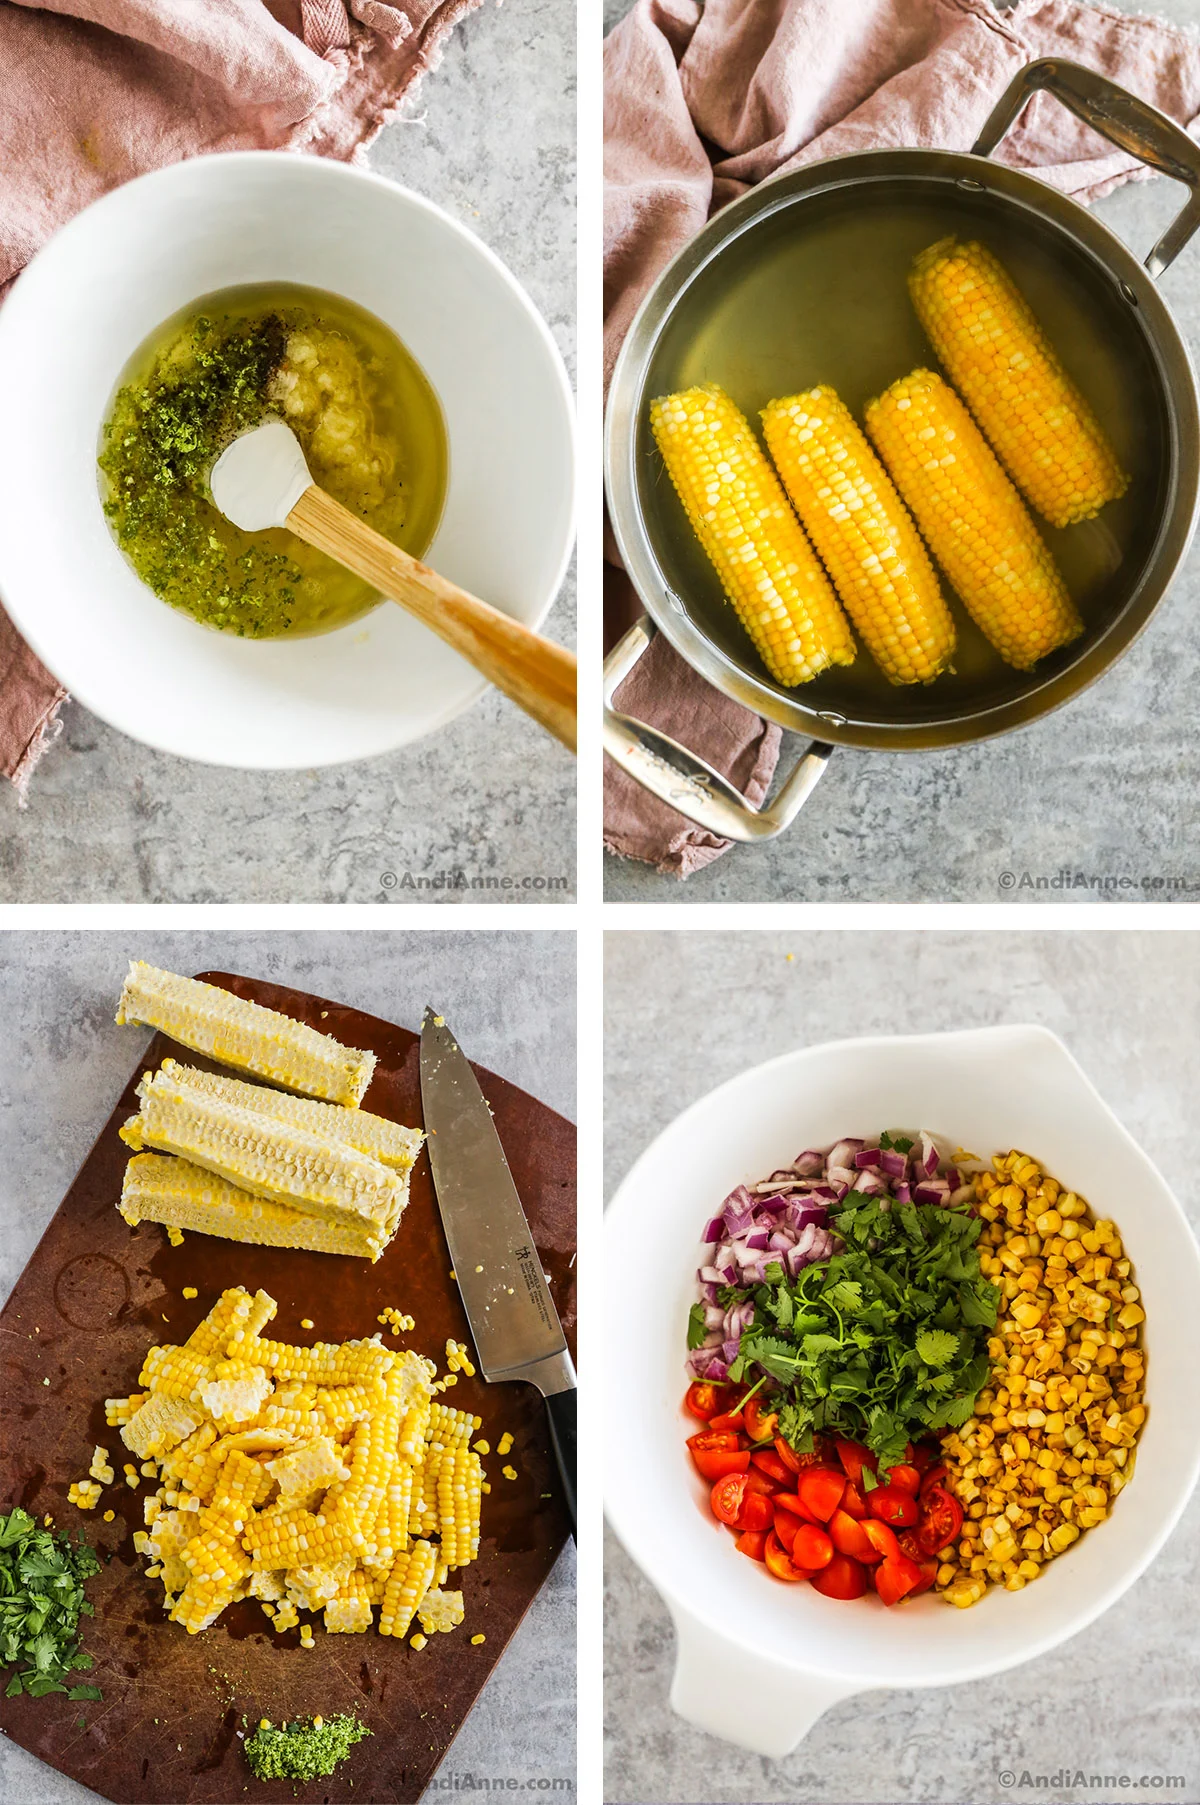 Four images showing steps to make recipe. First is a white bowl with ingredients to make dressing dumped in, second is cooked corn in a pot, third is sliced corn on a cutting board with knife, fourth is corn, tomatoes, onion and cilantro in a large white bowl.